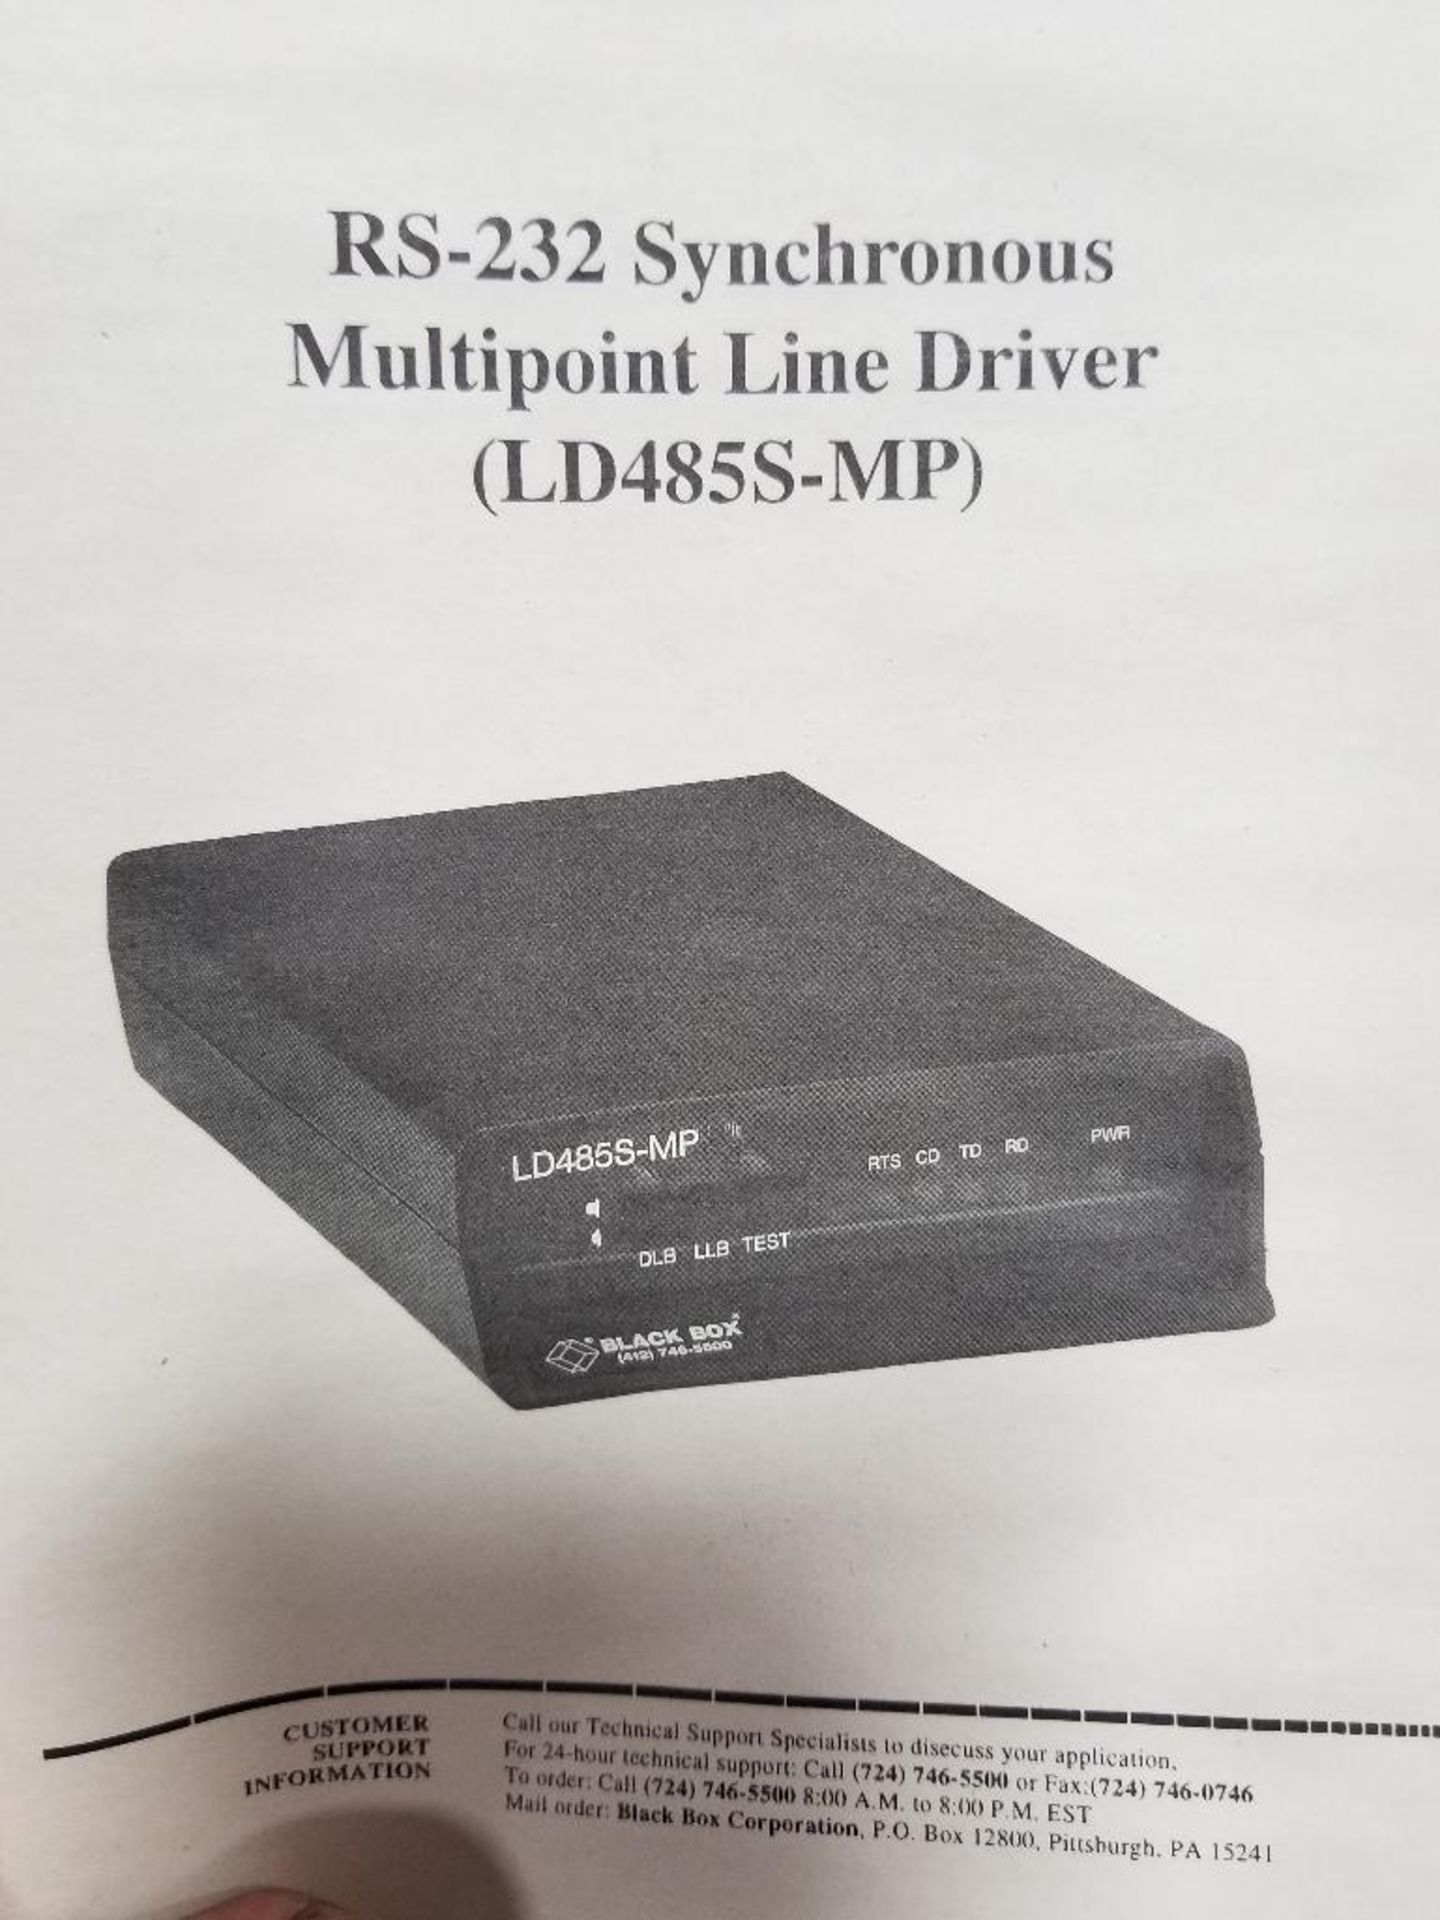 Black Box LD485S-MP Multipoint Line Driver.